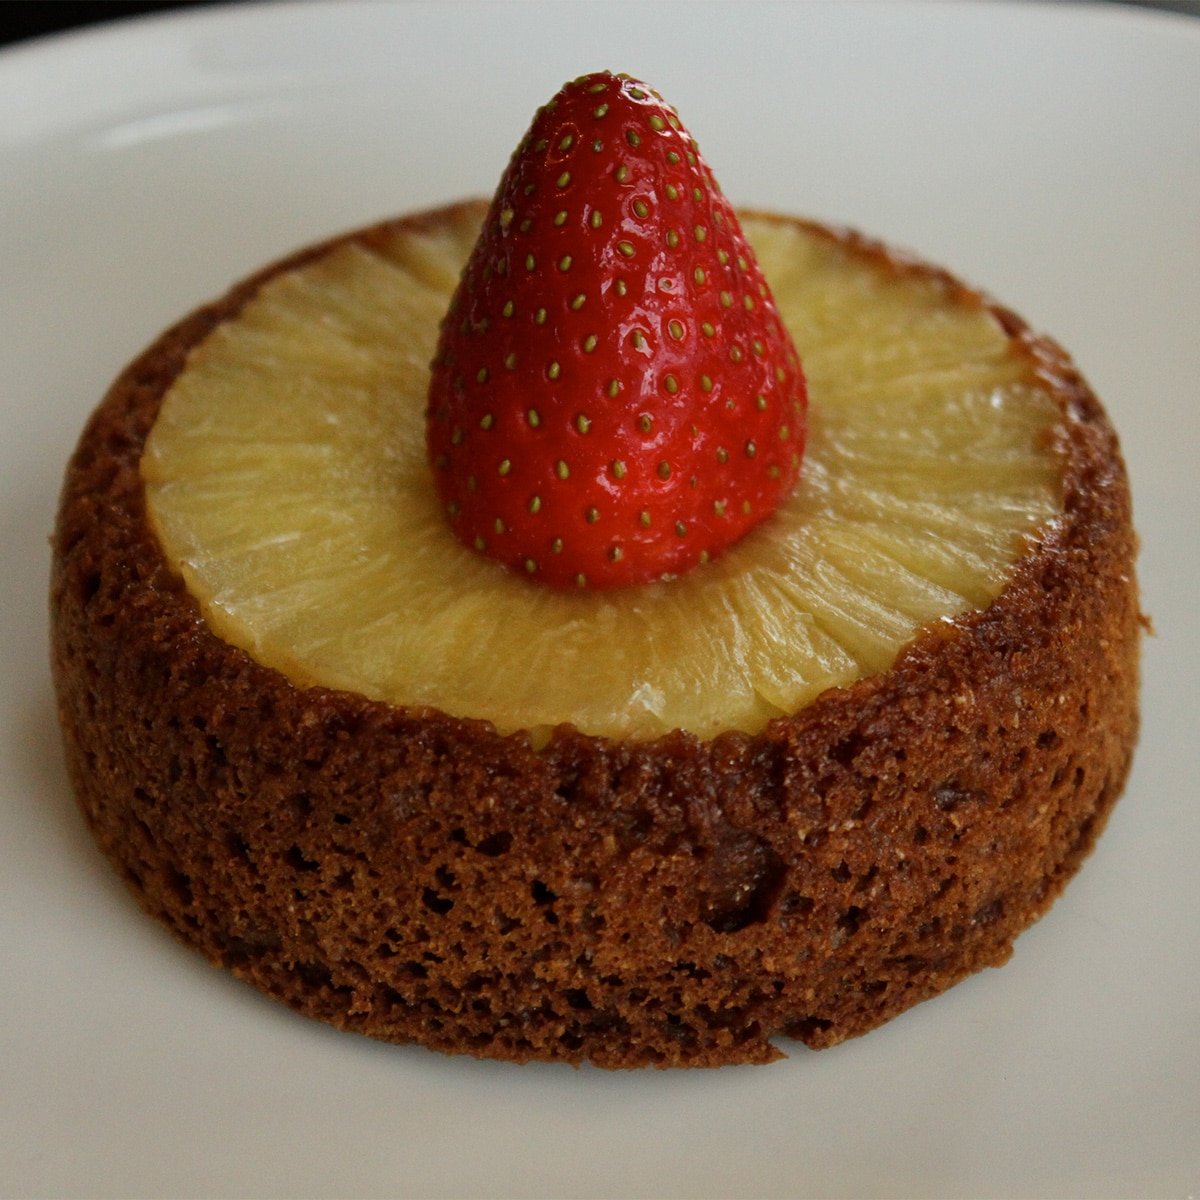 pineapple cake featured